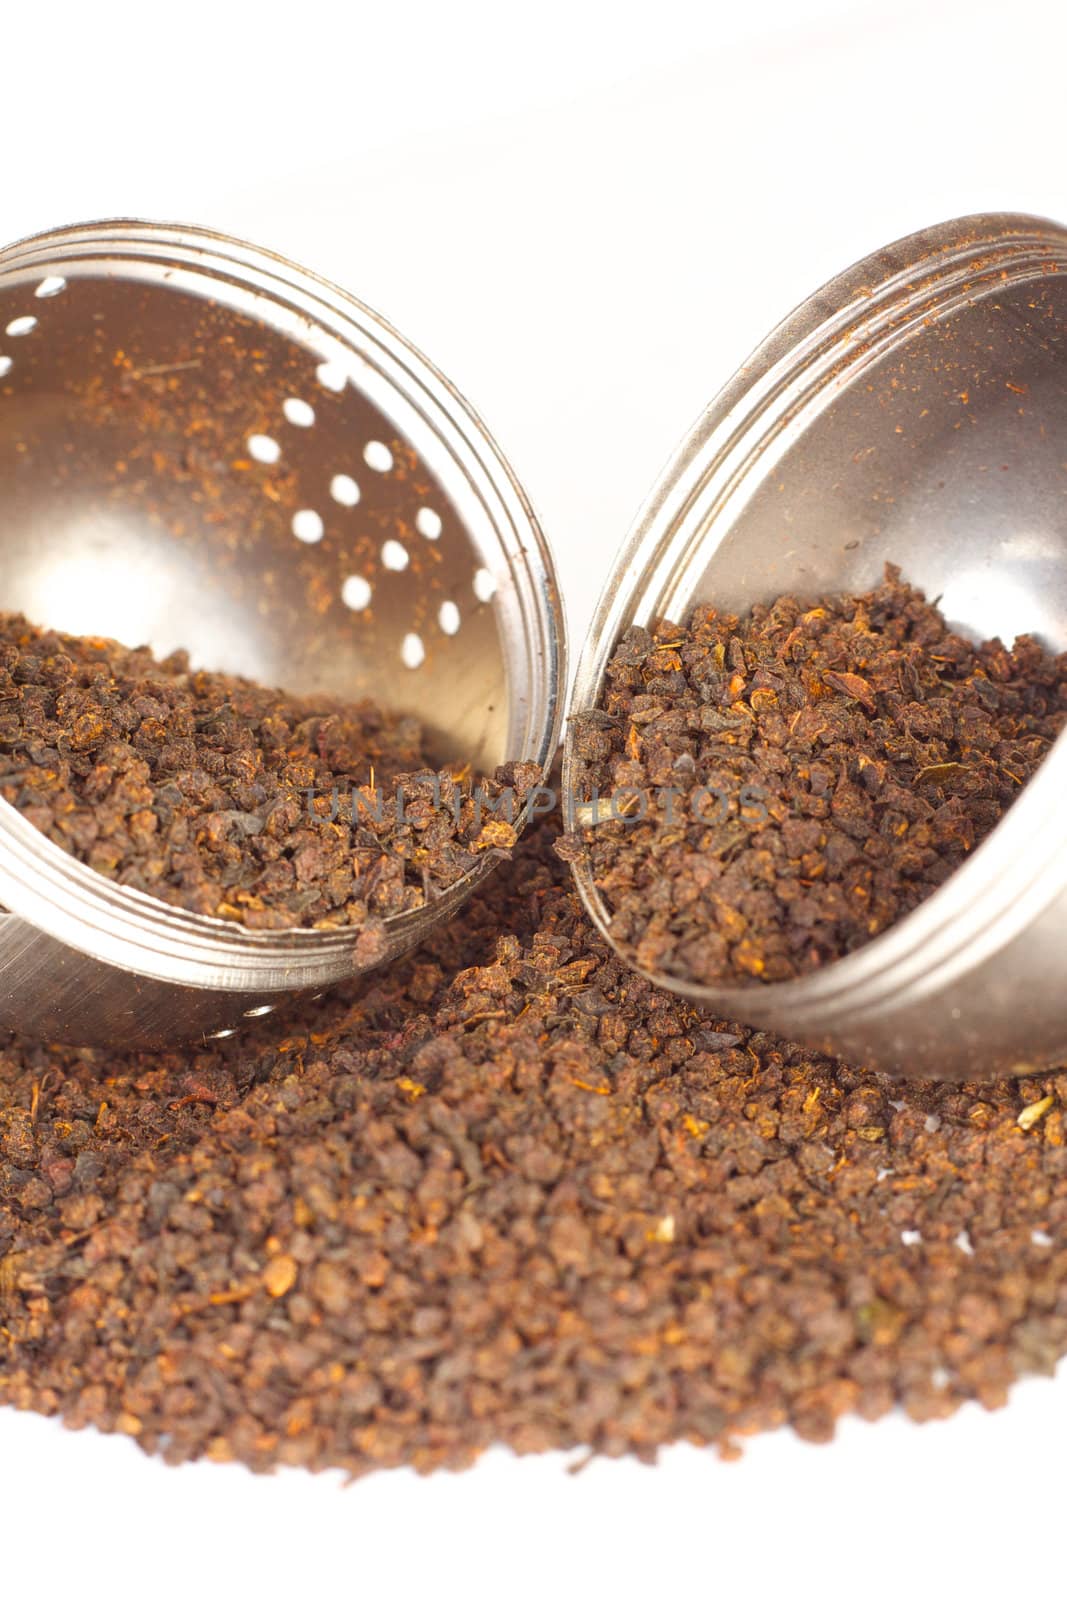 Loose black tea leaves spill from a tea strainer onto white